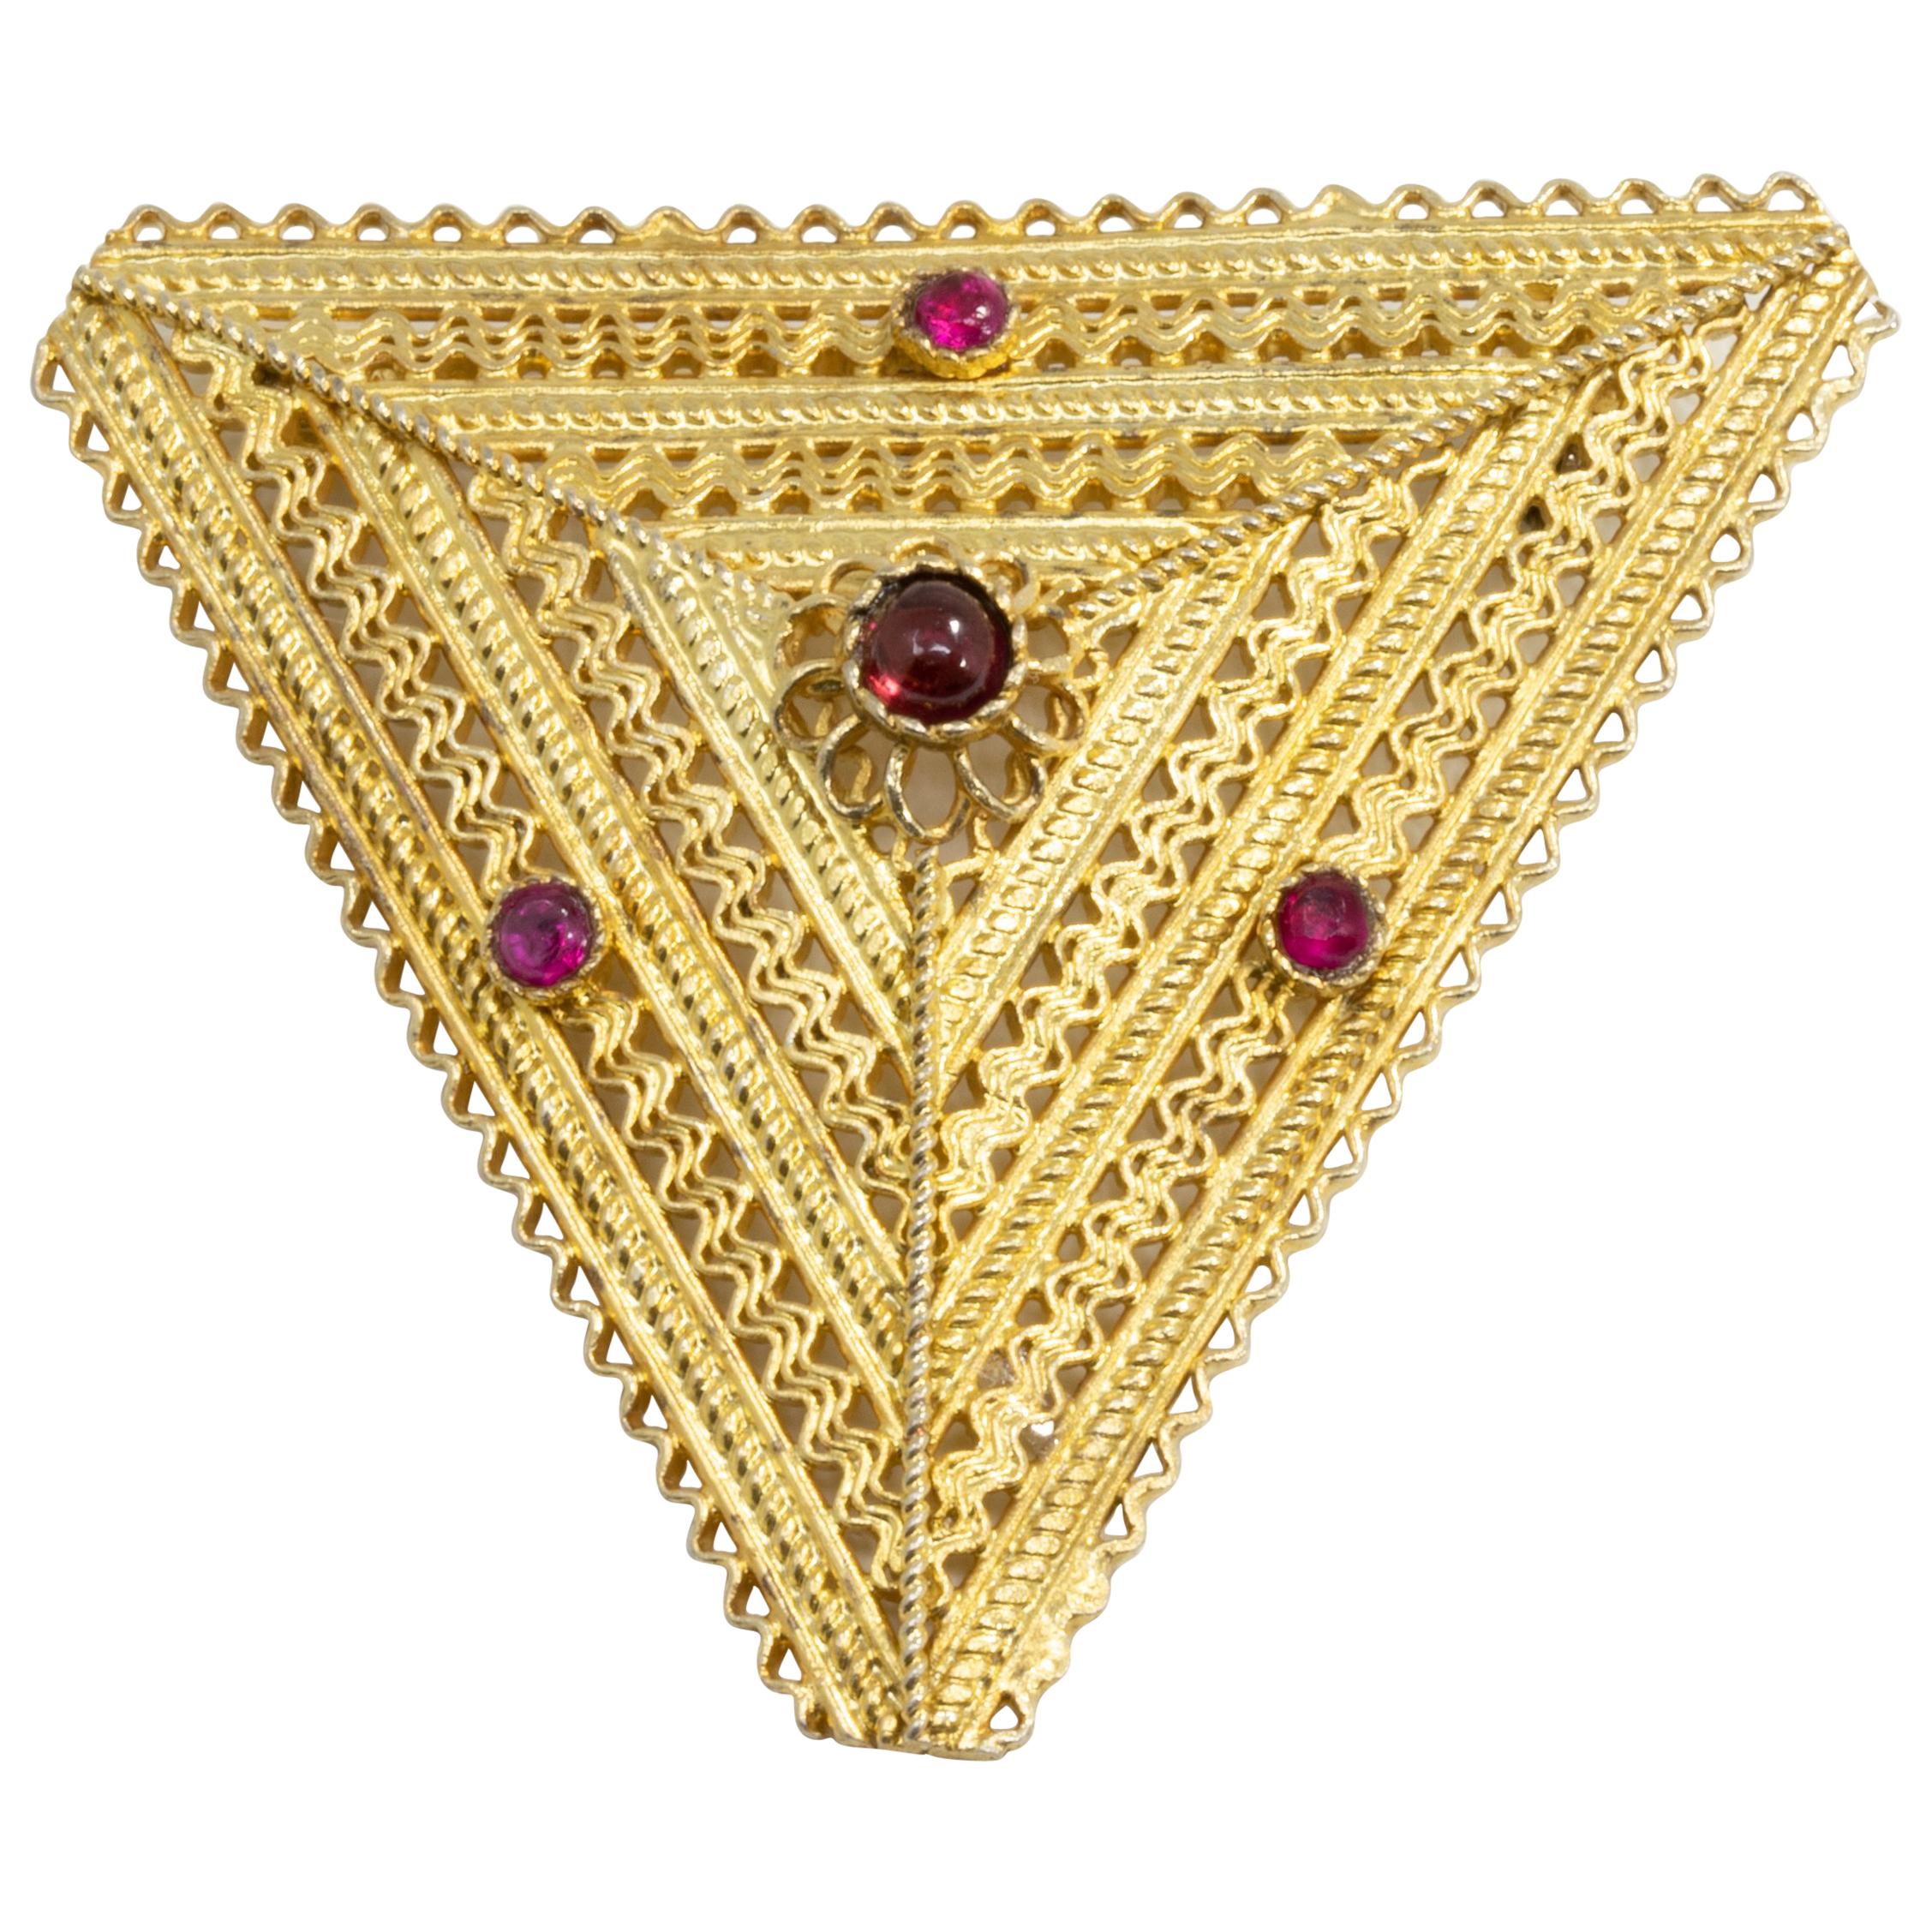 Ruby and Amethyst Triangular Floral Brooch Pin in Gold, Early 1900s